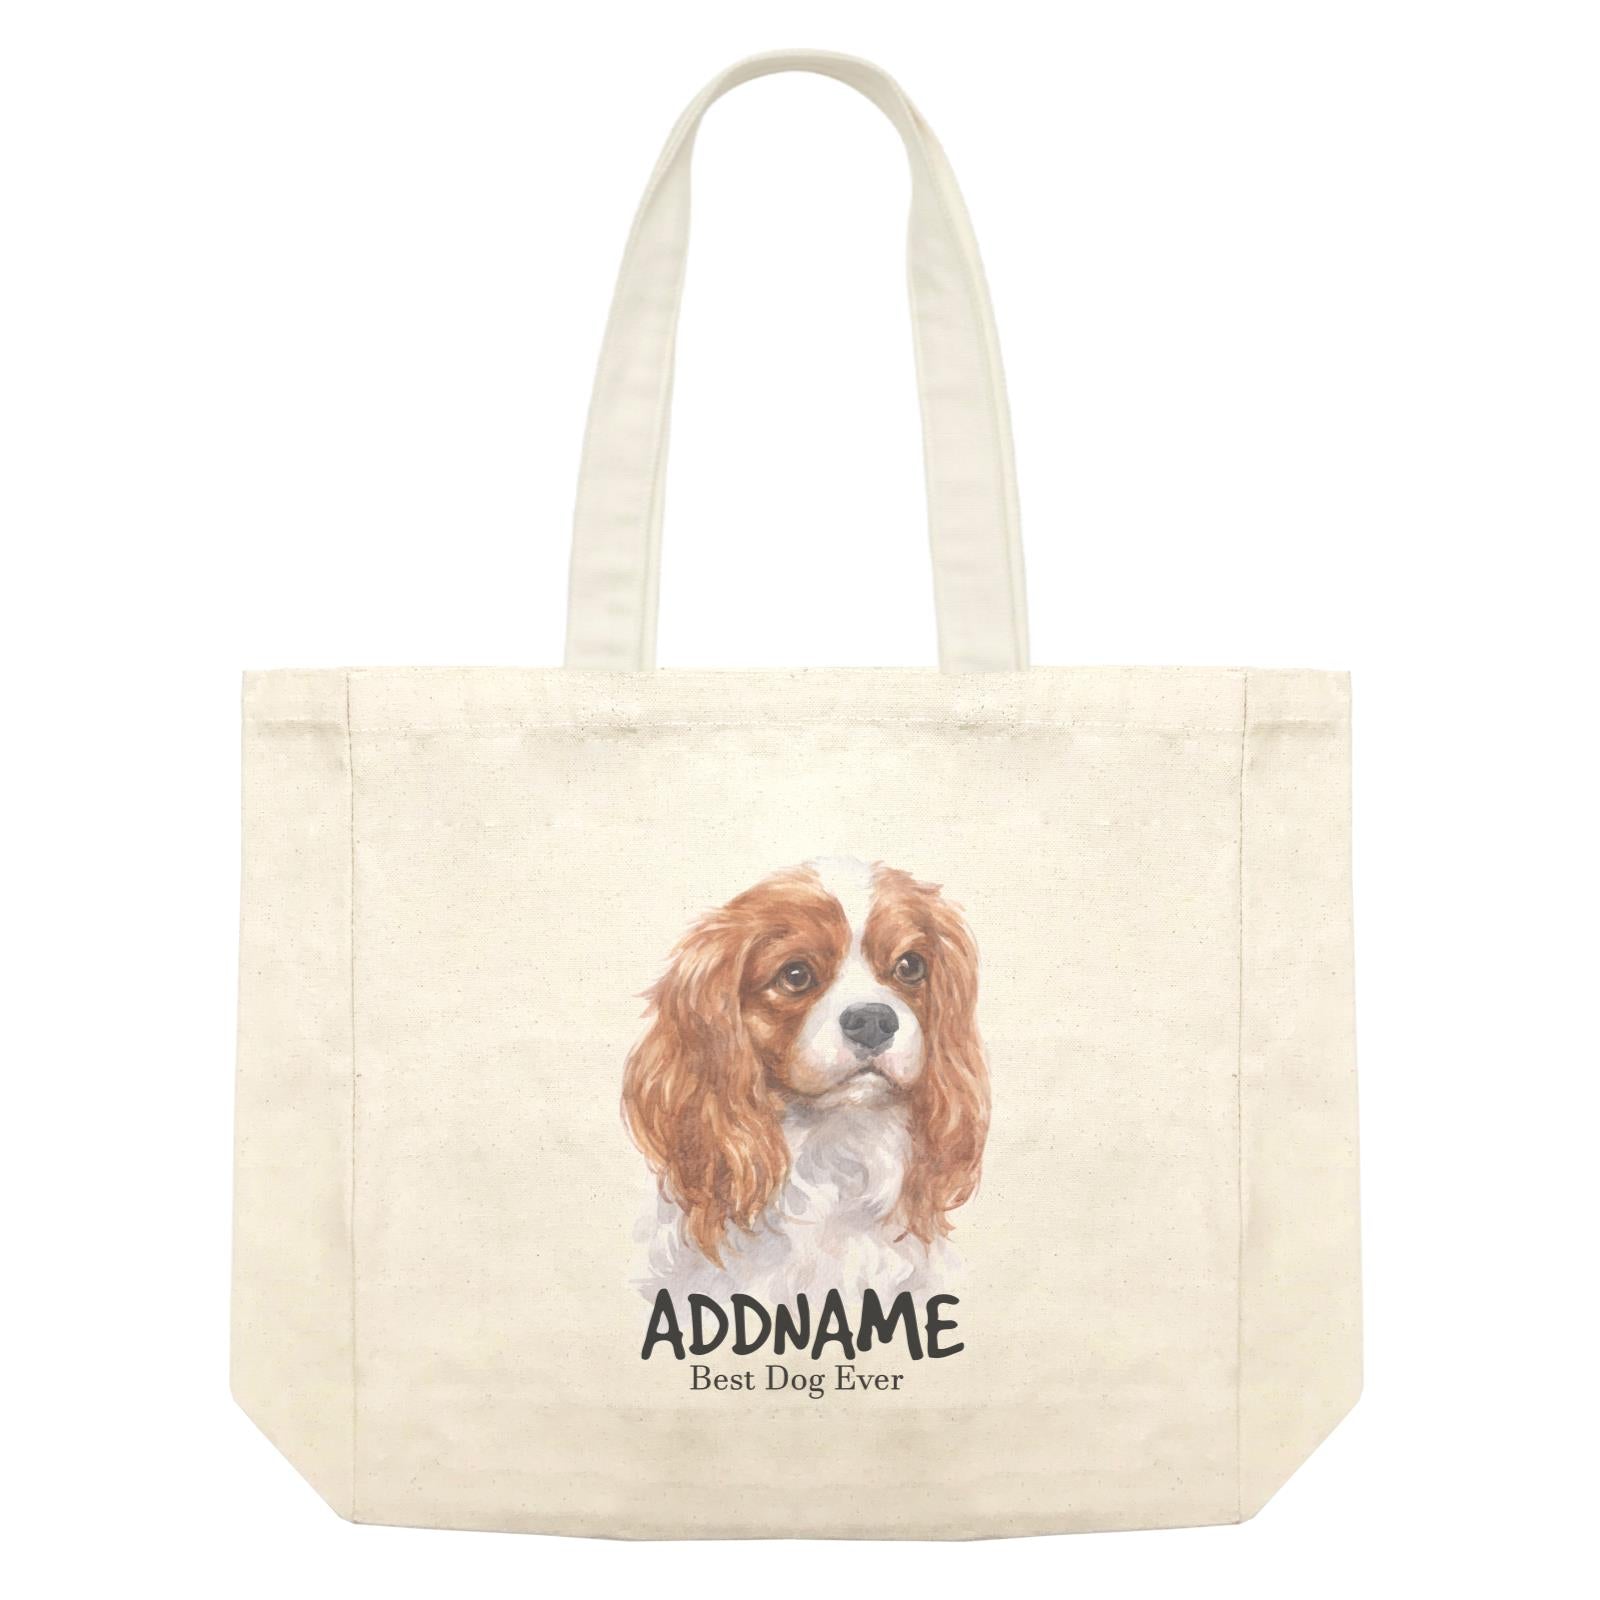 Watercolor Dog King Charles Spaniel Curly Best Dog Ever Addname Shopping Bag